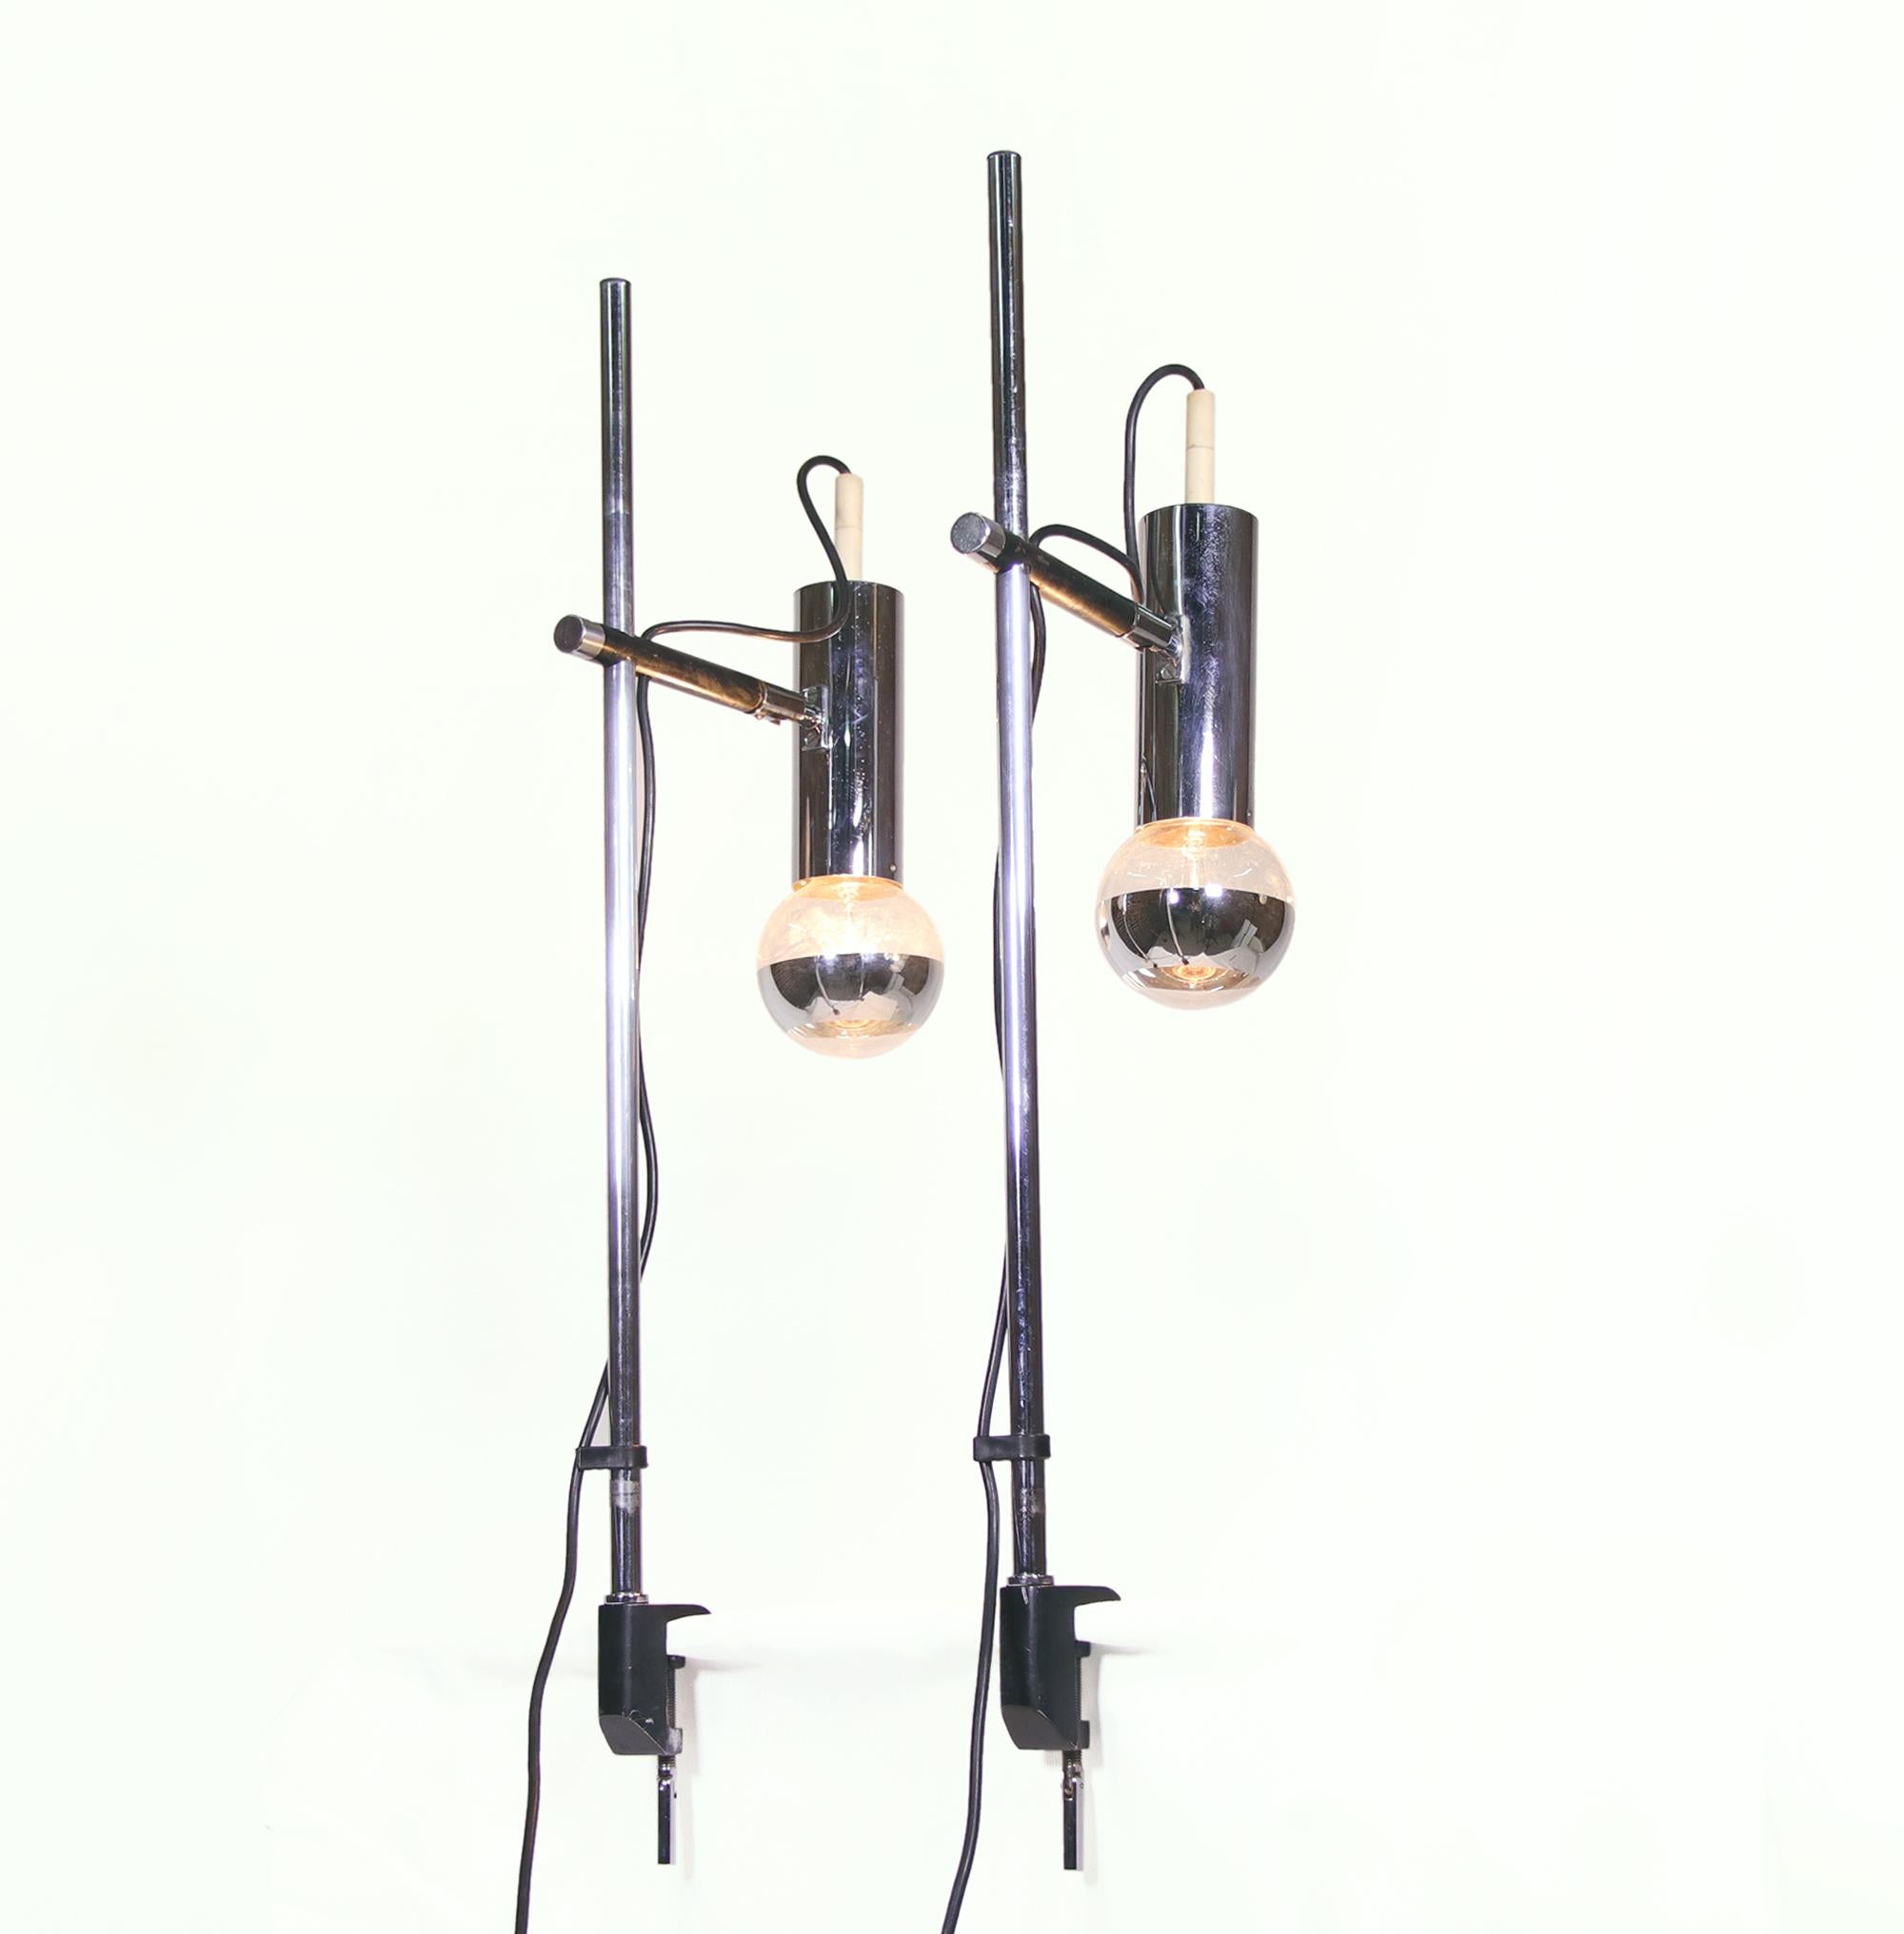 Mid-20th Century Adjustable Pair of Minimalist Articulated Desk Clamp Lamps by Staff Germany 1960 For Sale